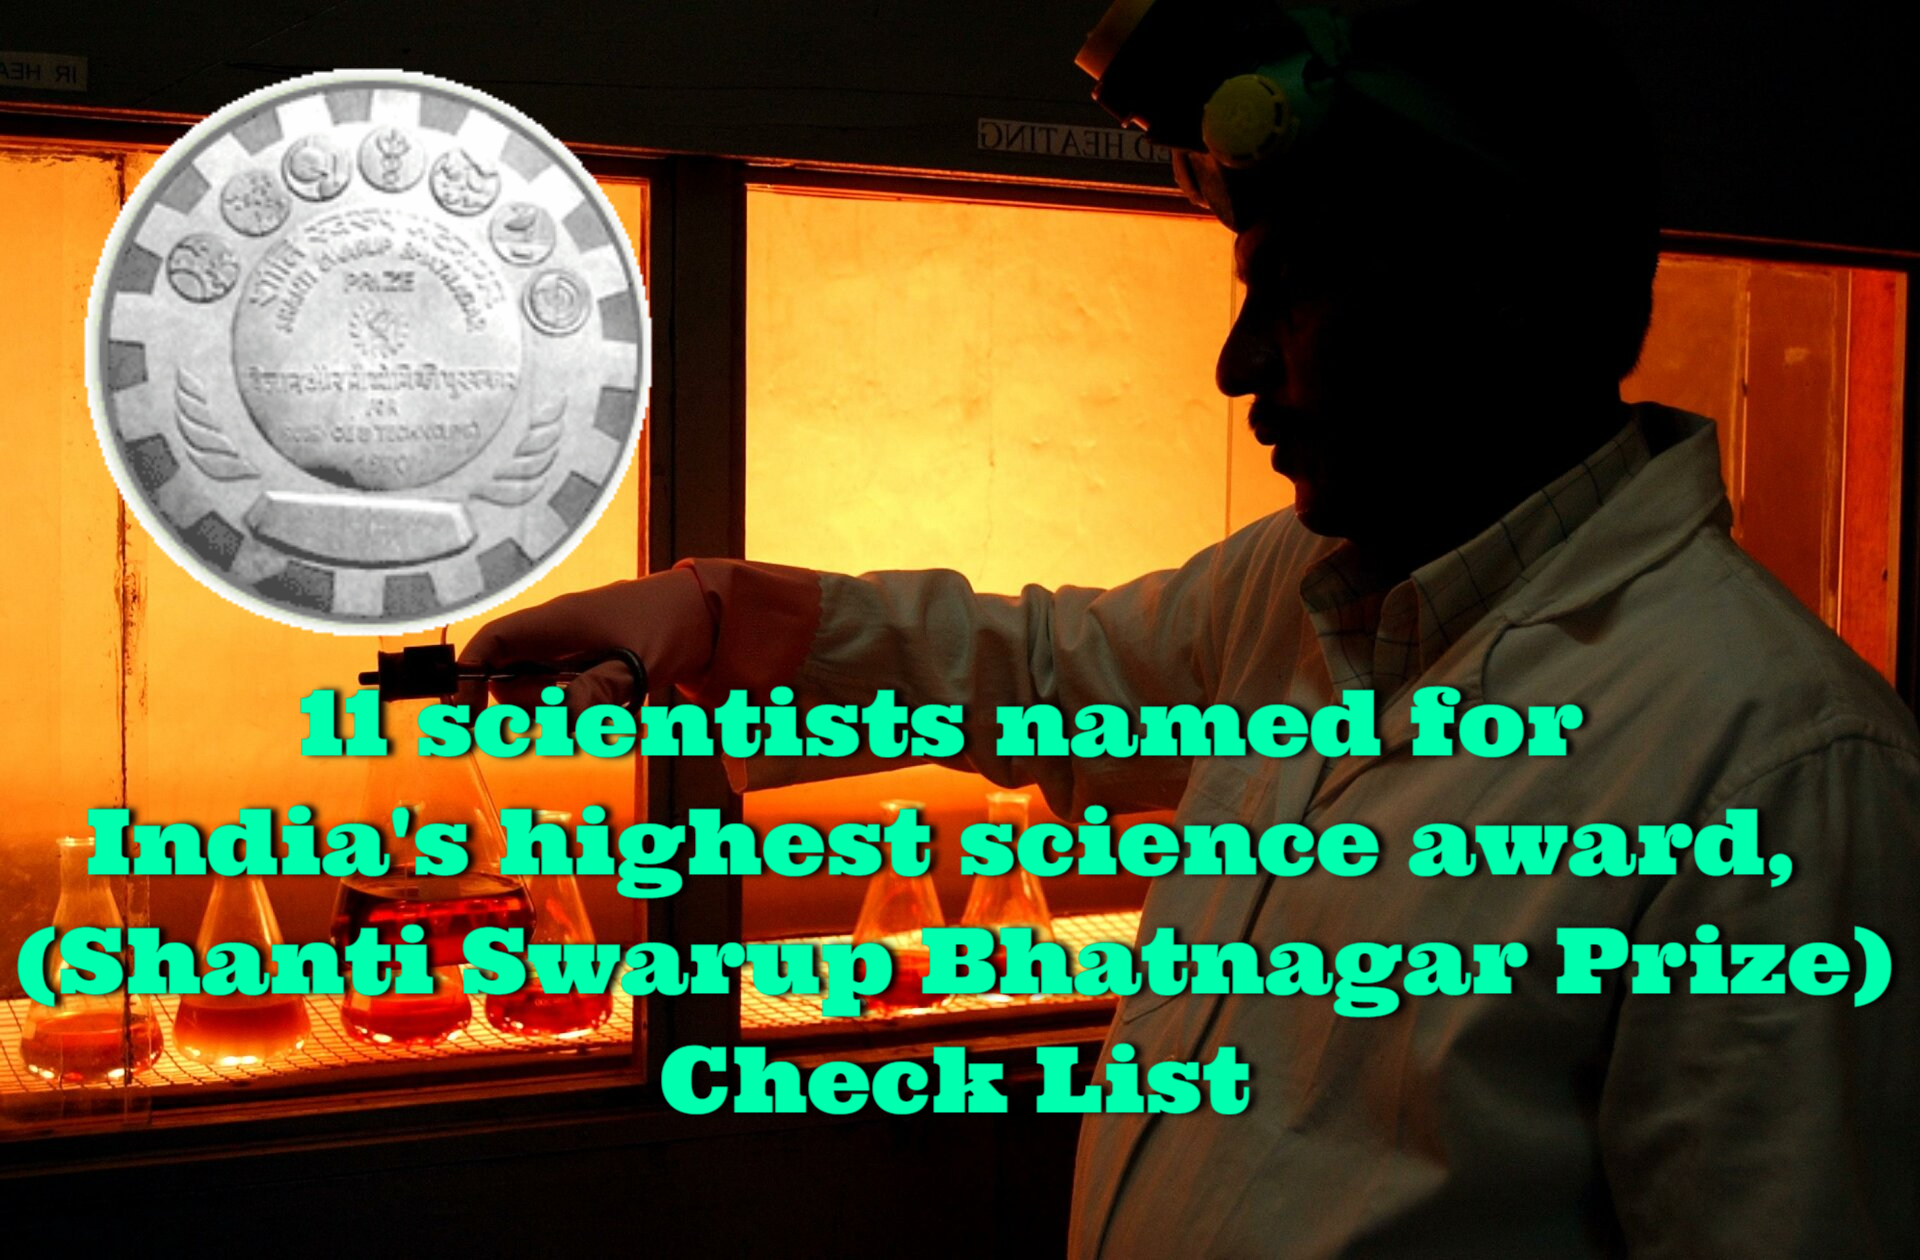 Eleven scientists have been named for India’s highest science award Shanti Swarup Bhatnagar Prize-Check List